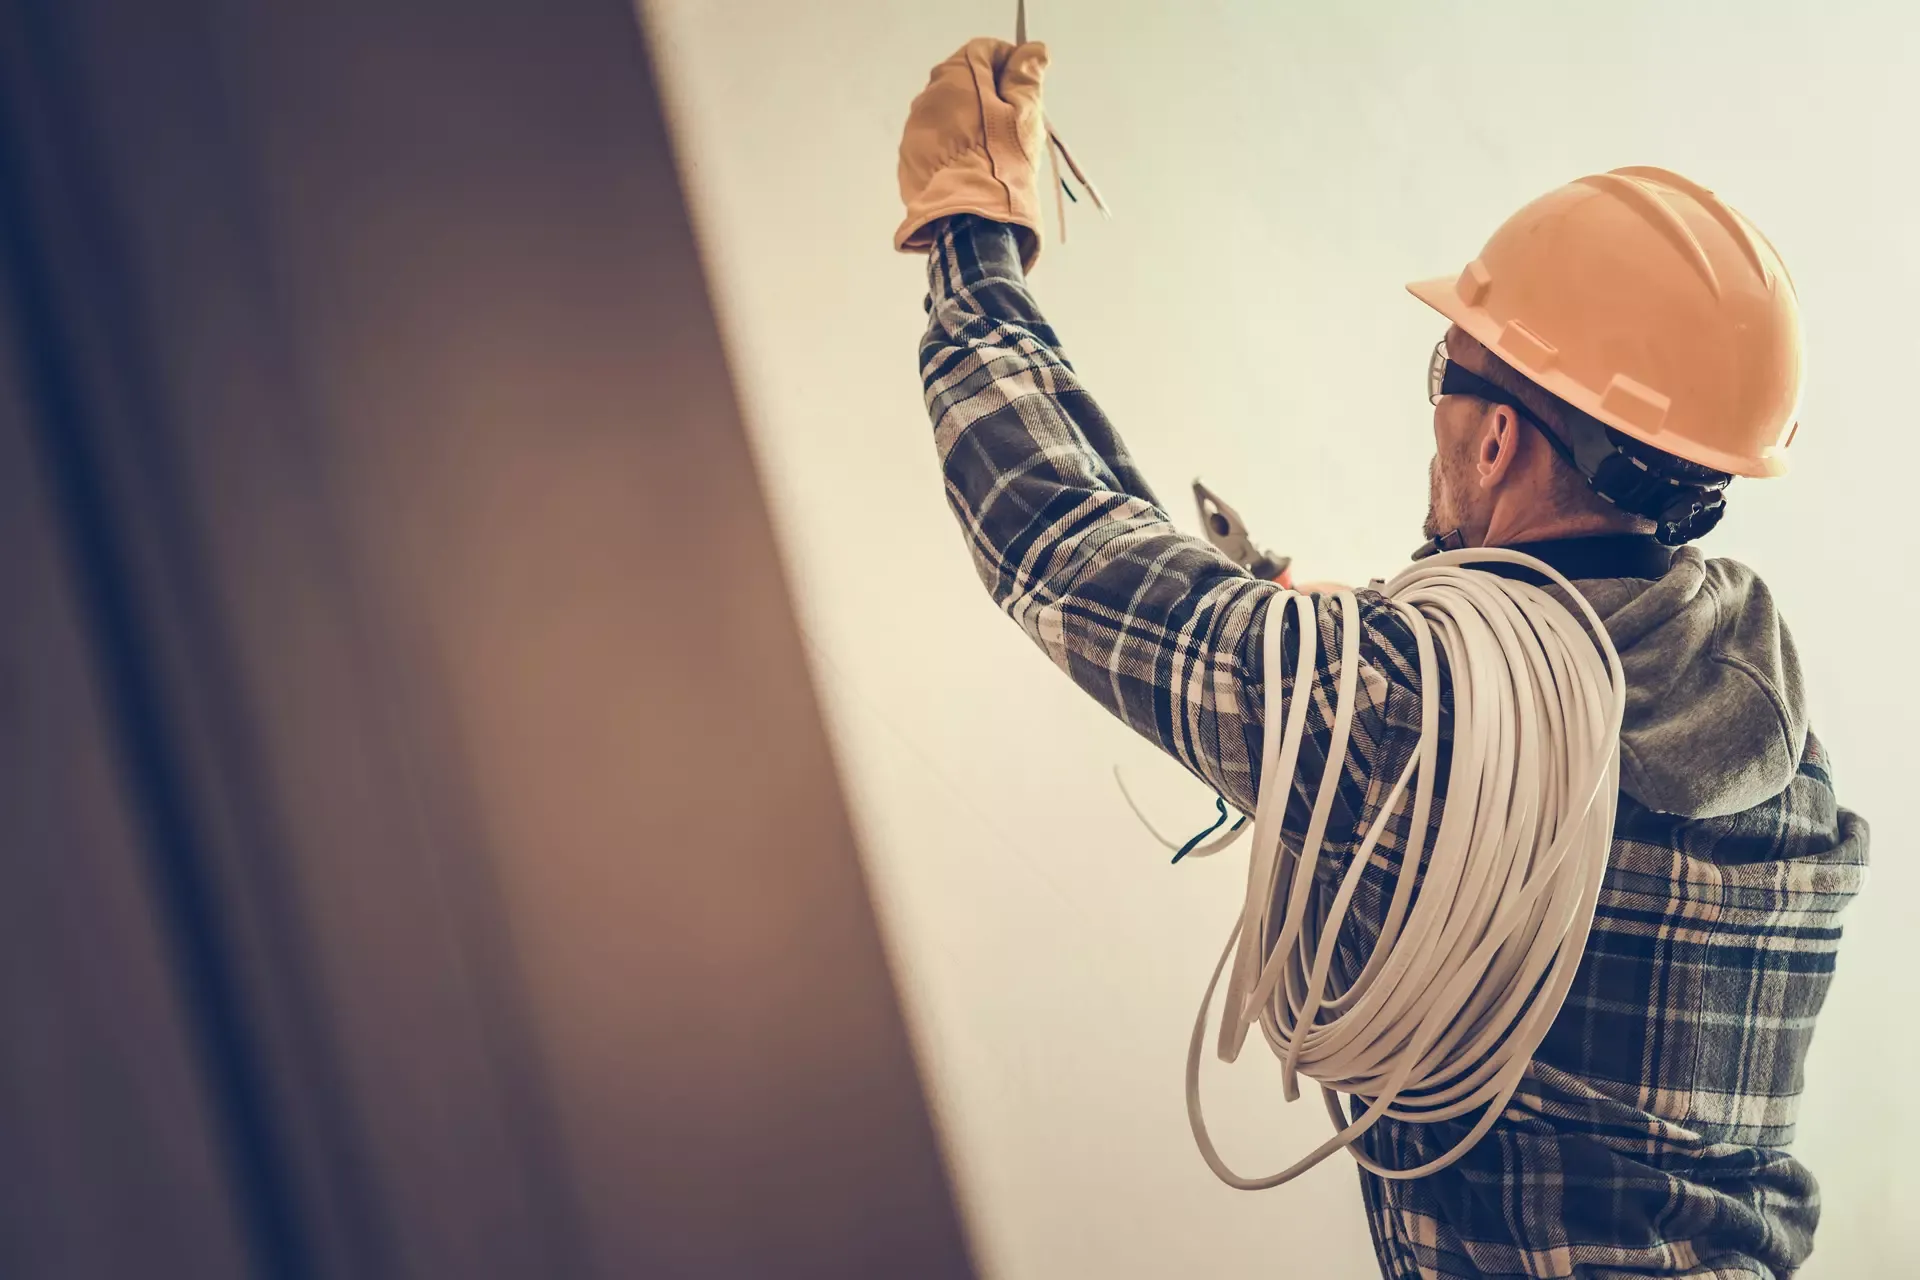 Electrician Services in West Chester: Keeping Your Home Safe and Well-Powered